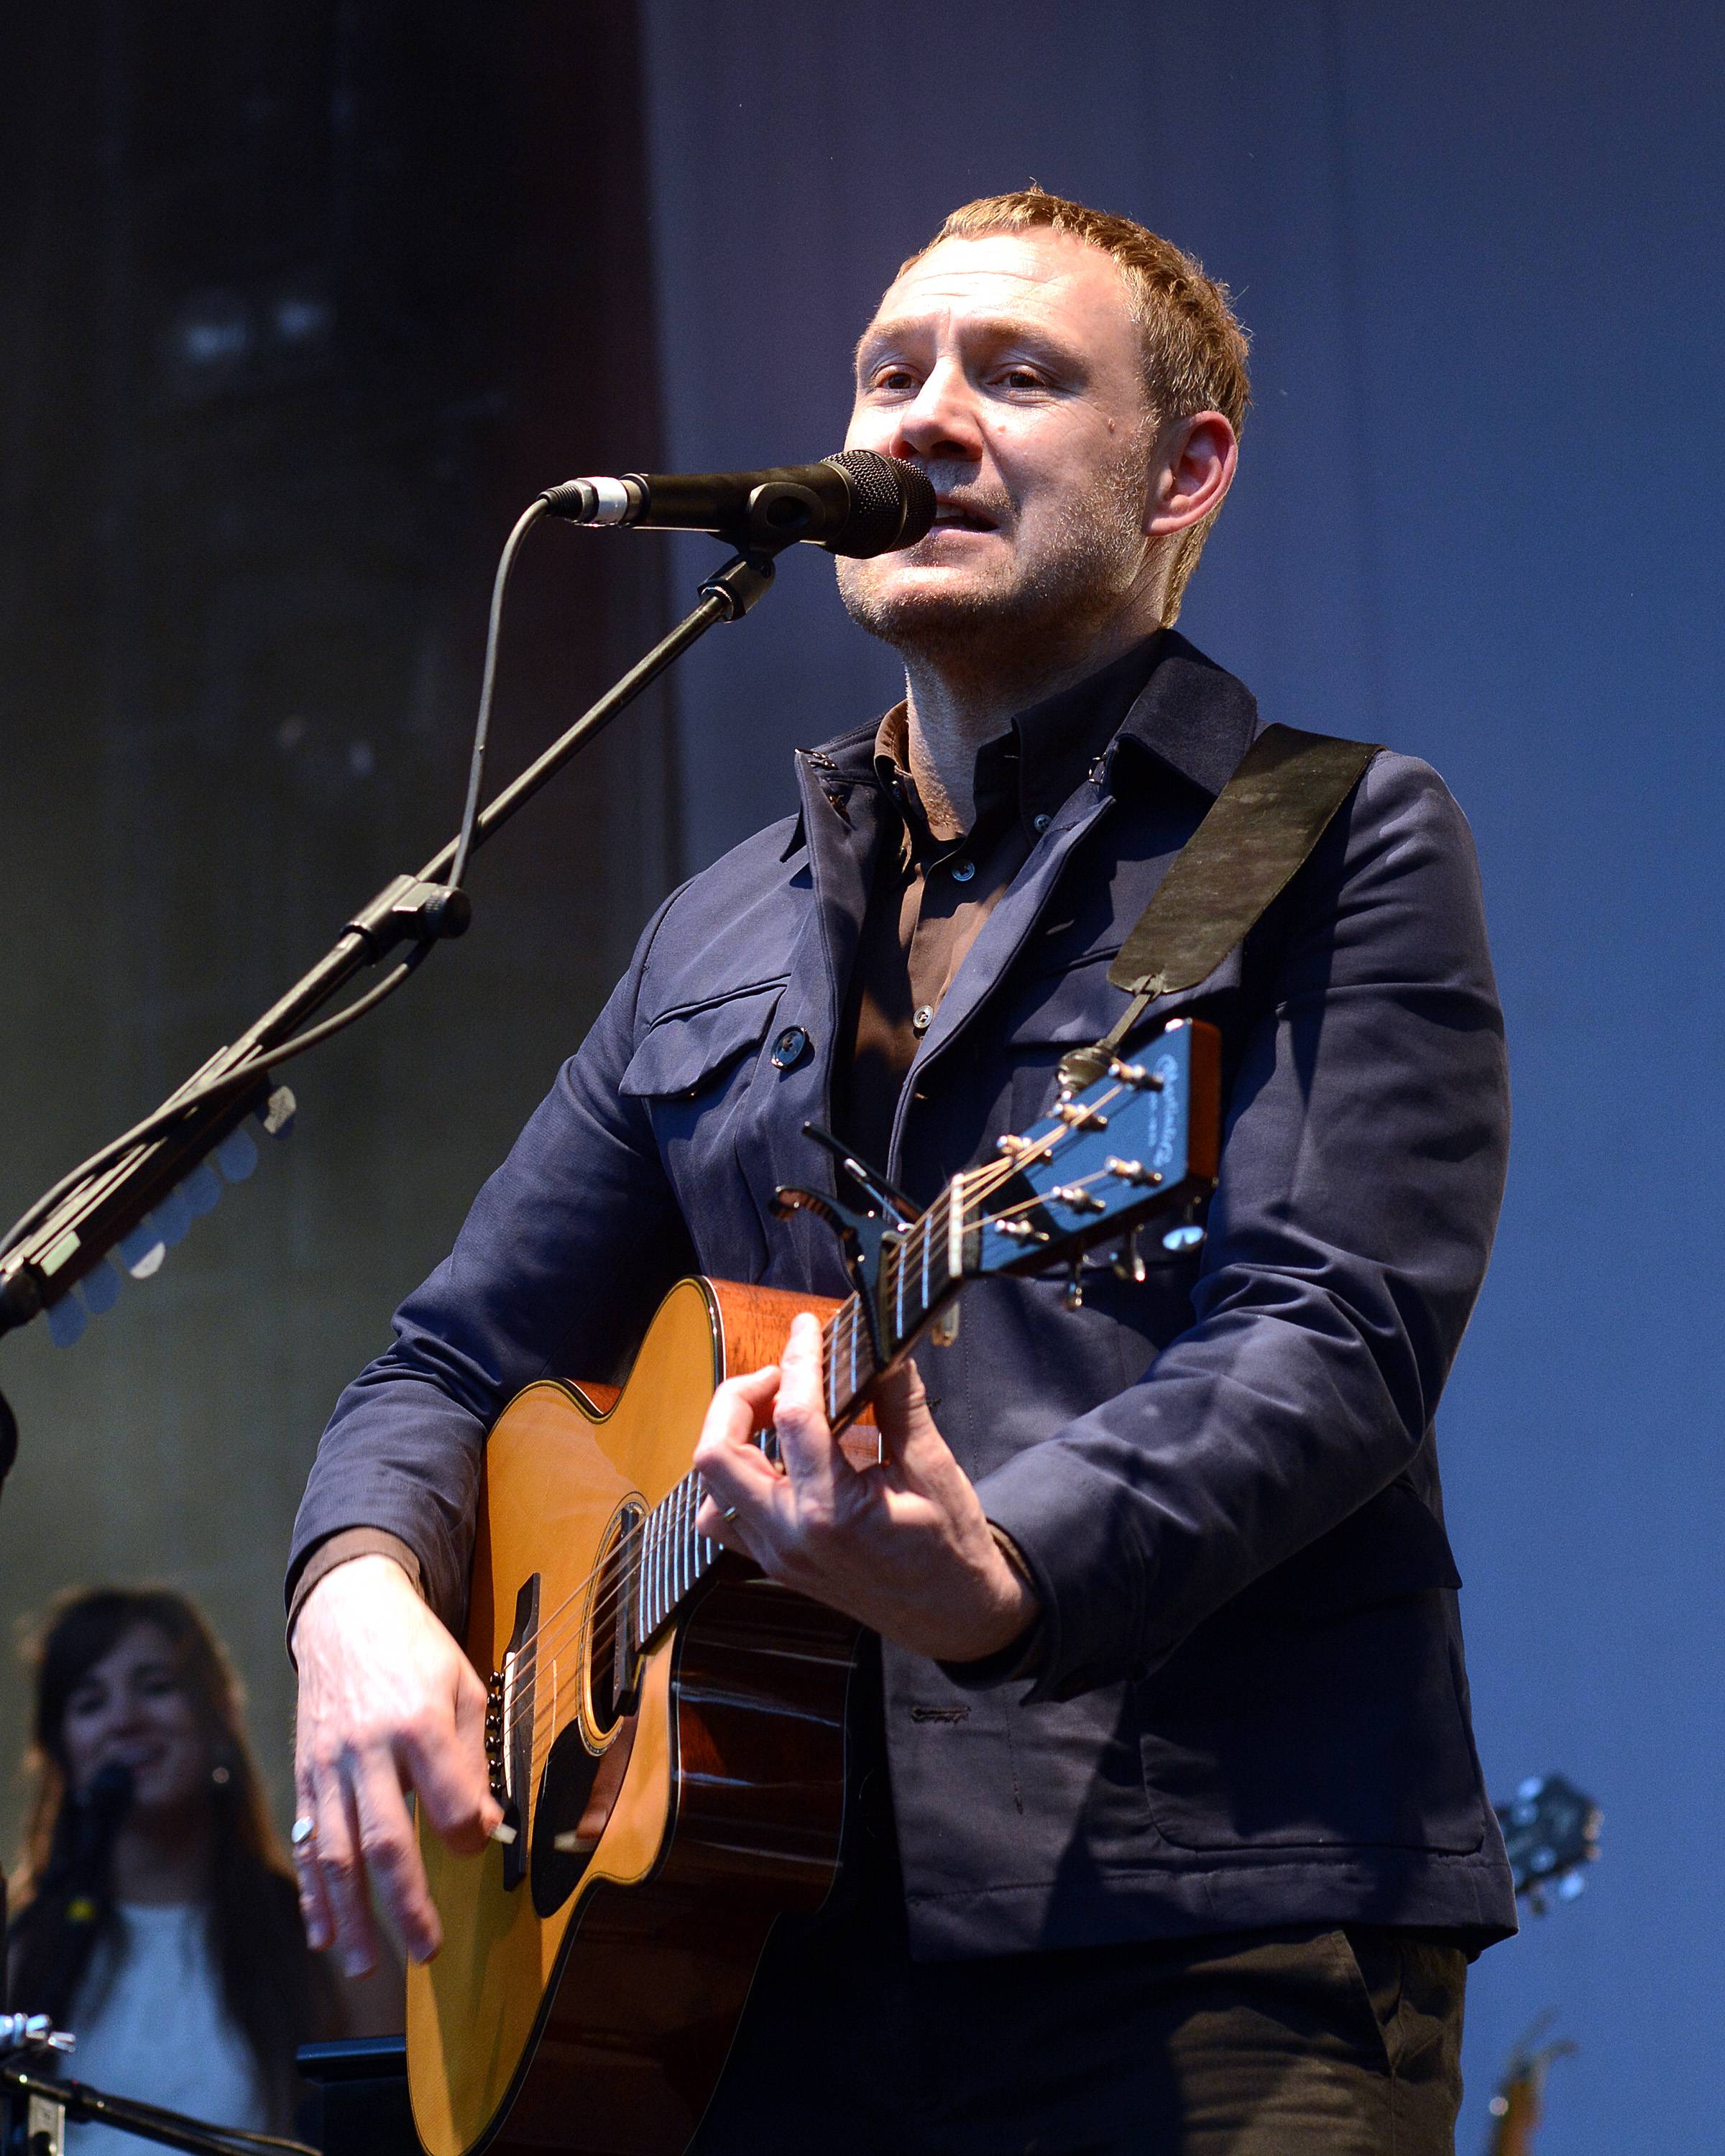 David Gray & others at The Groove Festival